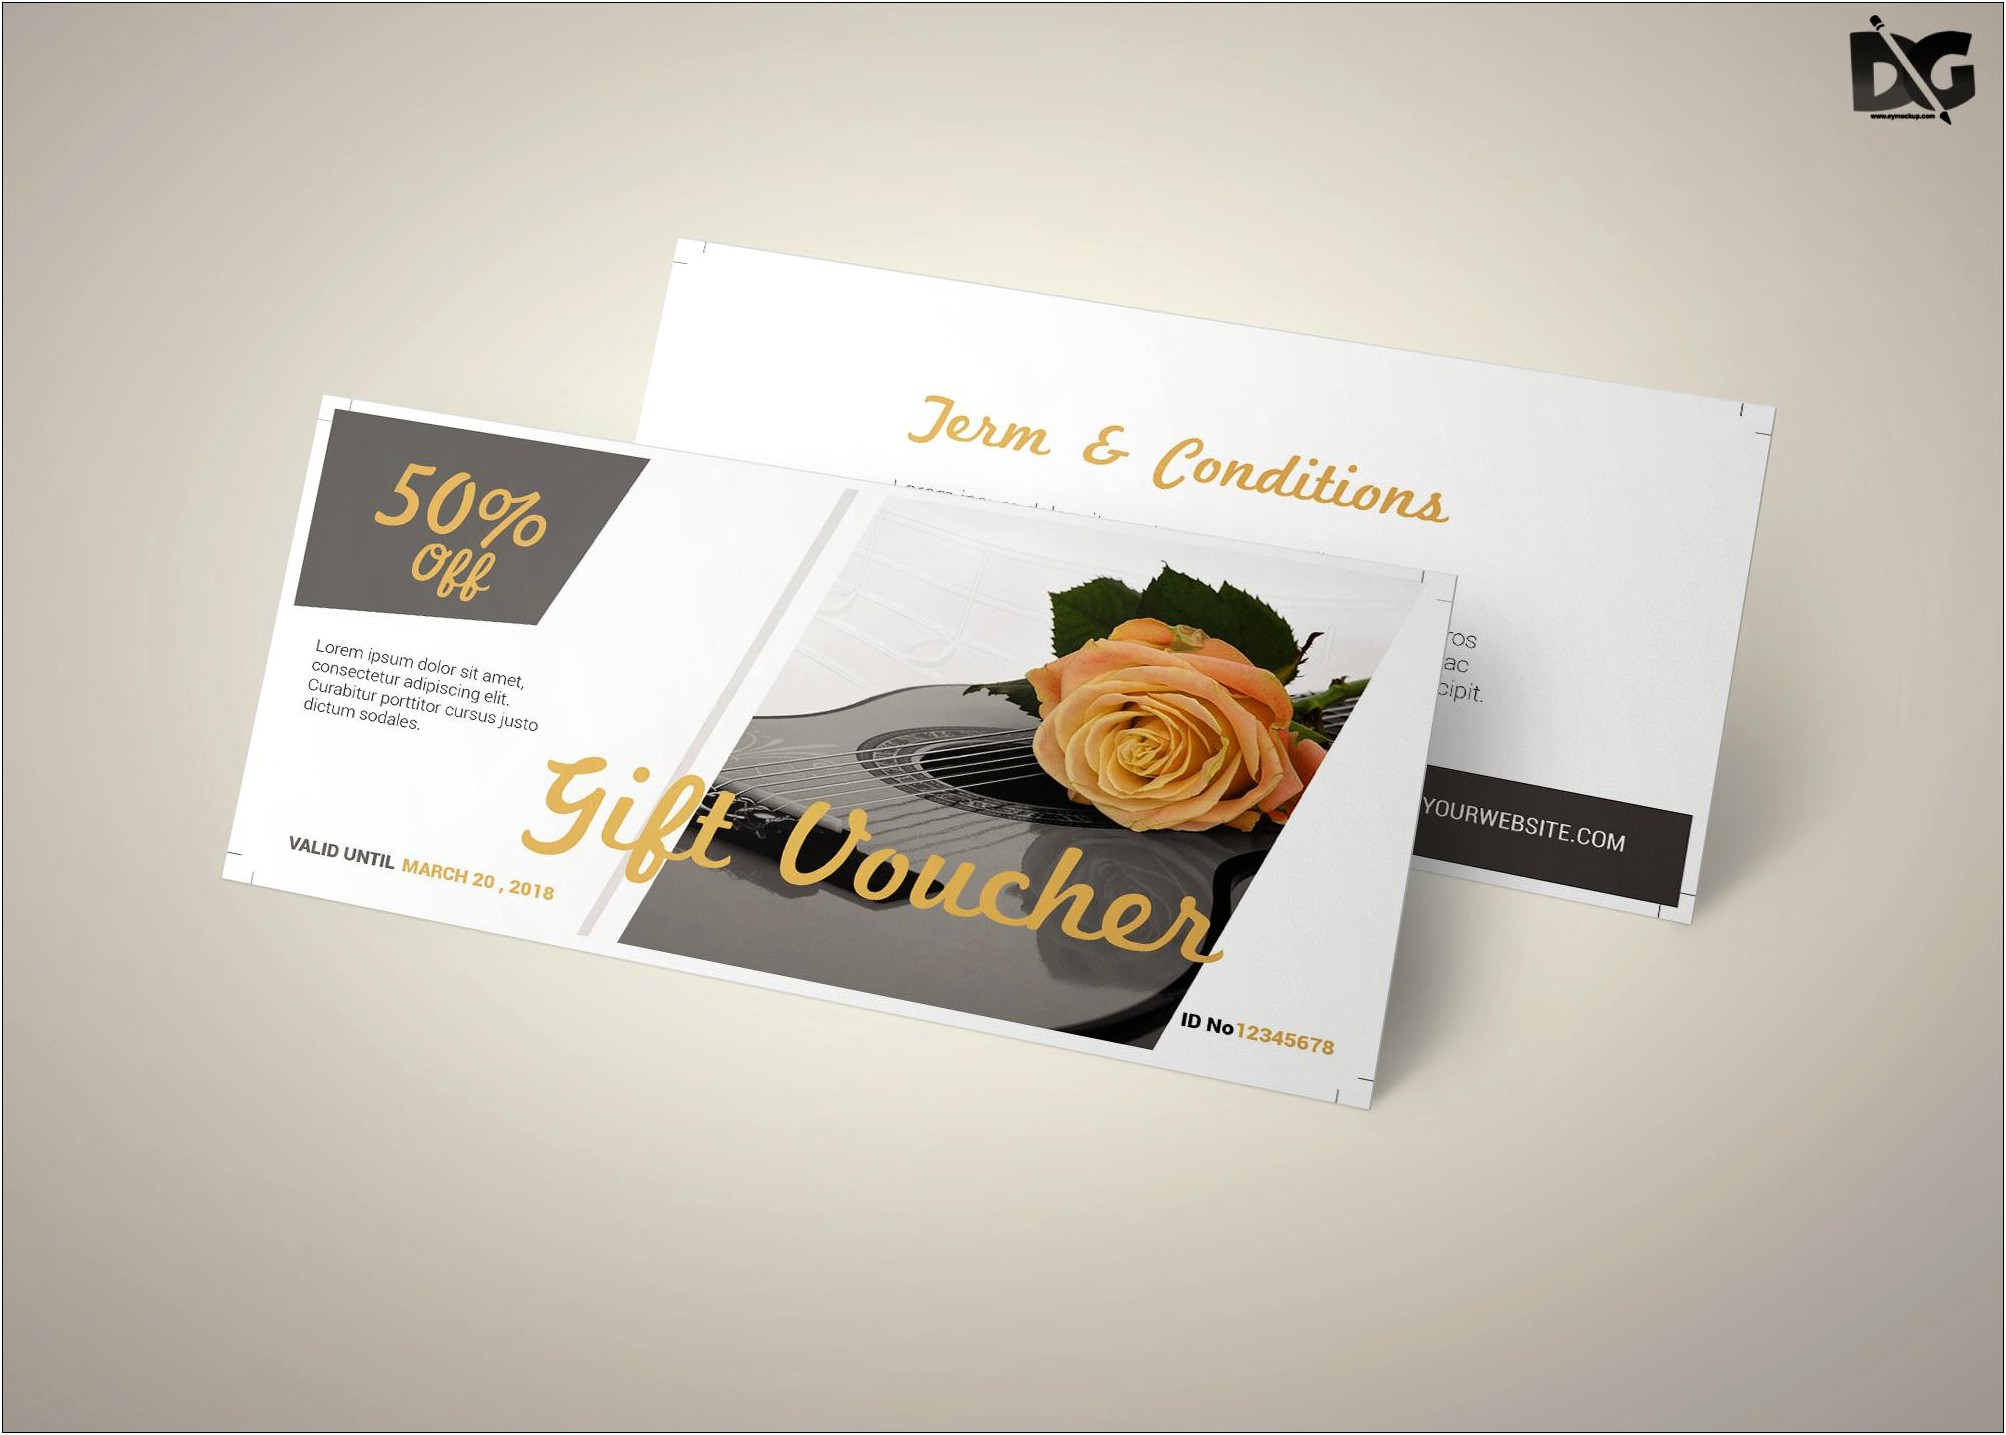 Free Gift Certificate Template No Download